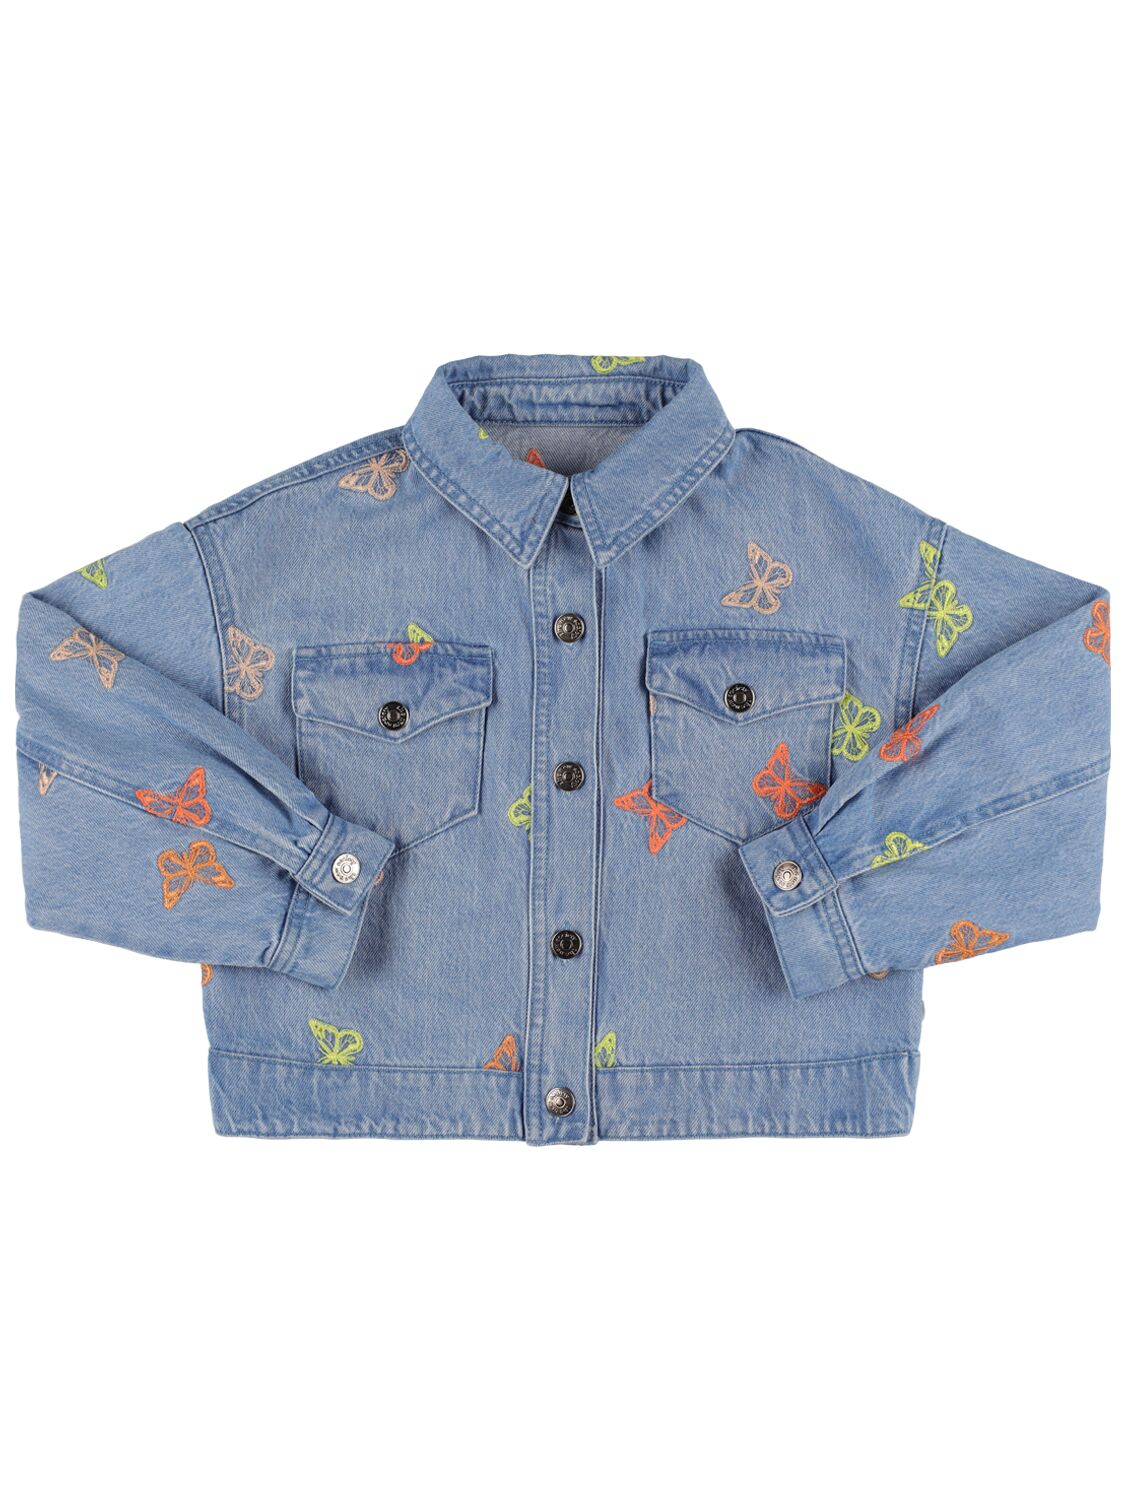 The New Society Kids' Embroidered Cotton Denim Jacket In Blue,multi